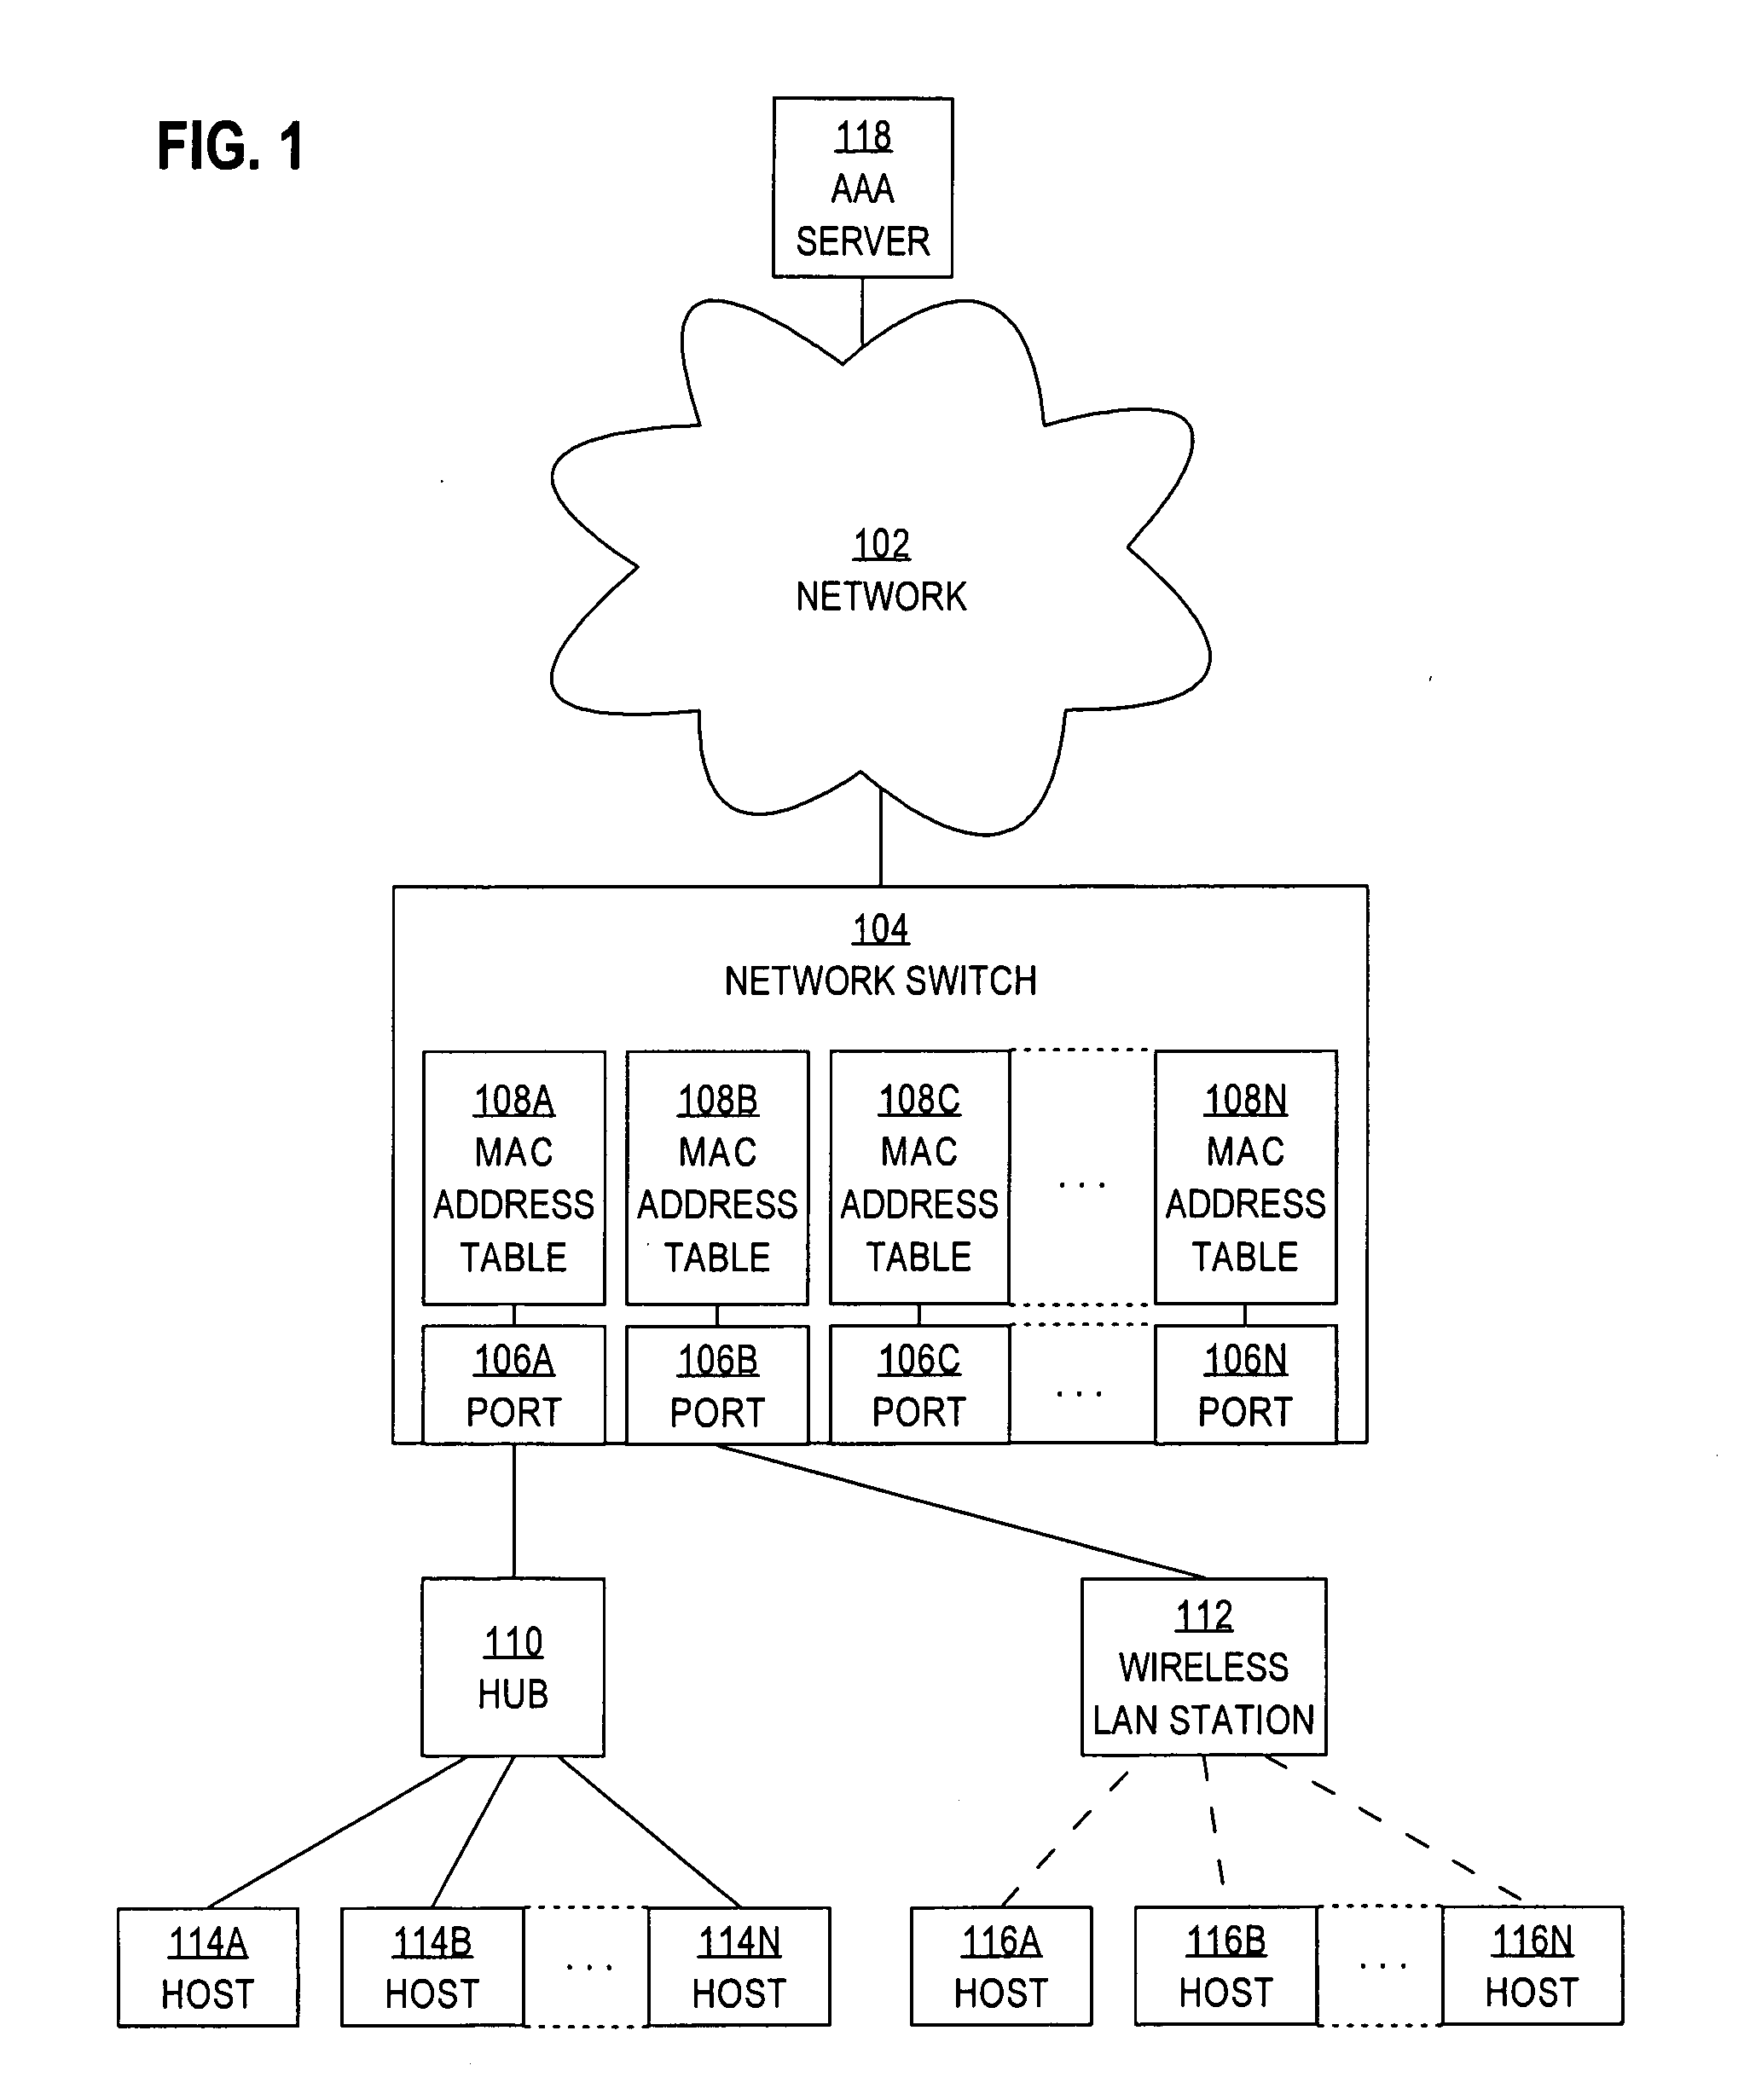 Authenticating multiple network elements that access a network through a single network switch port